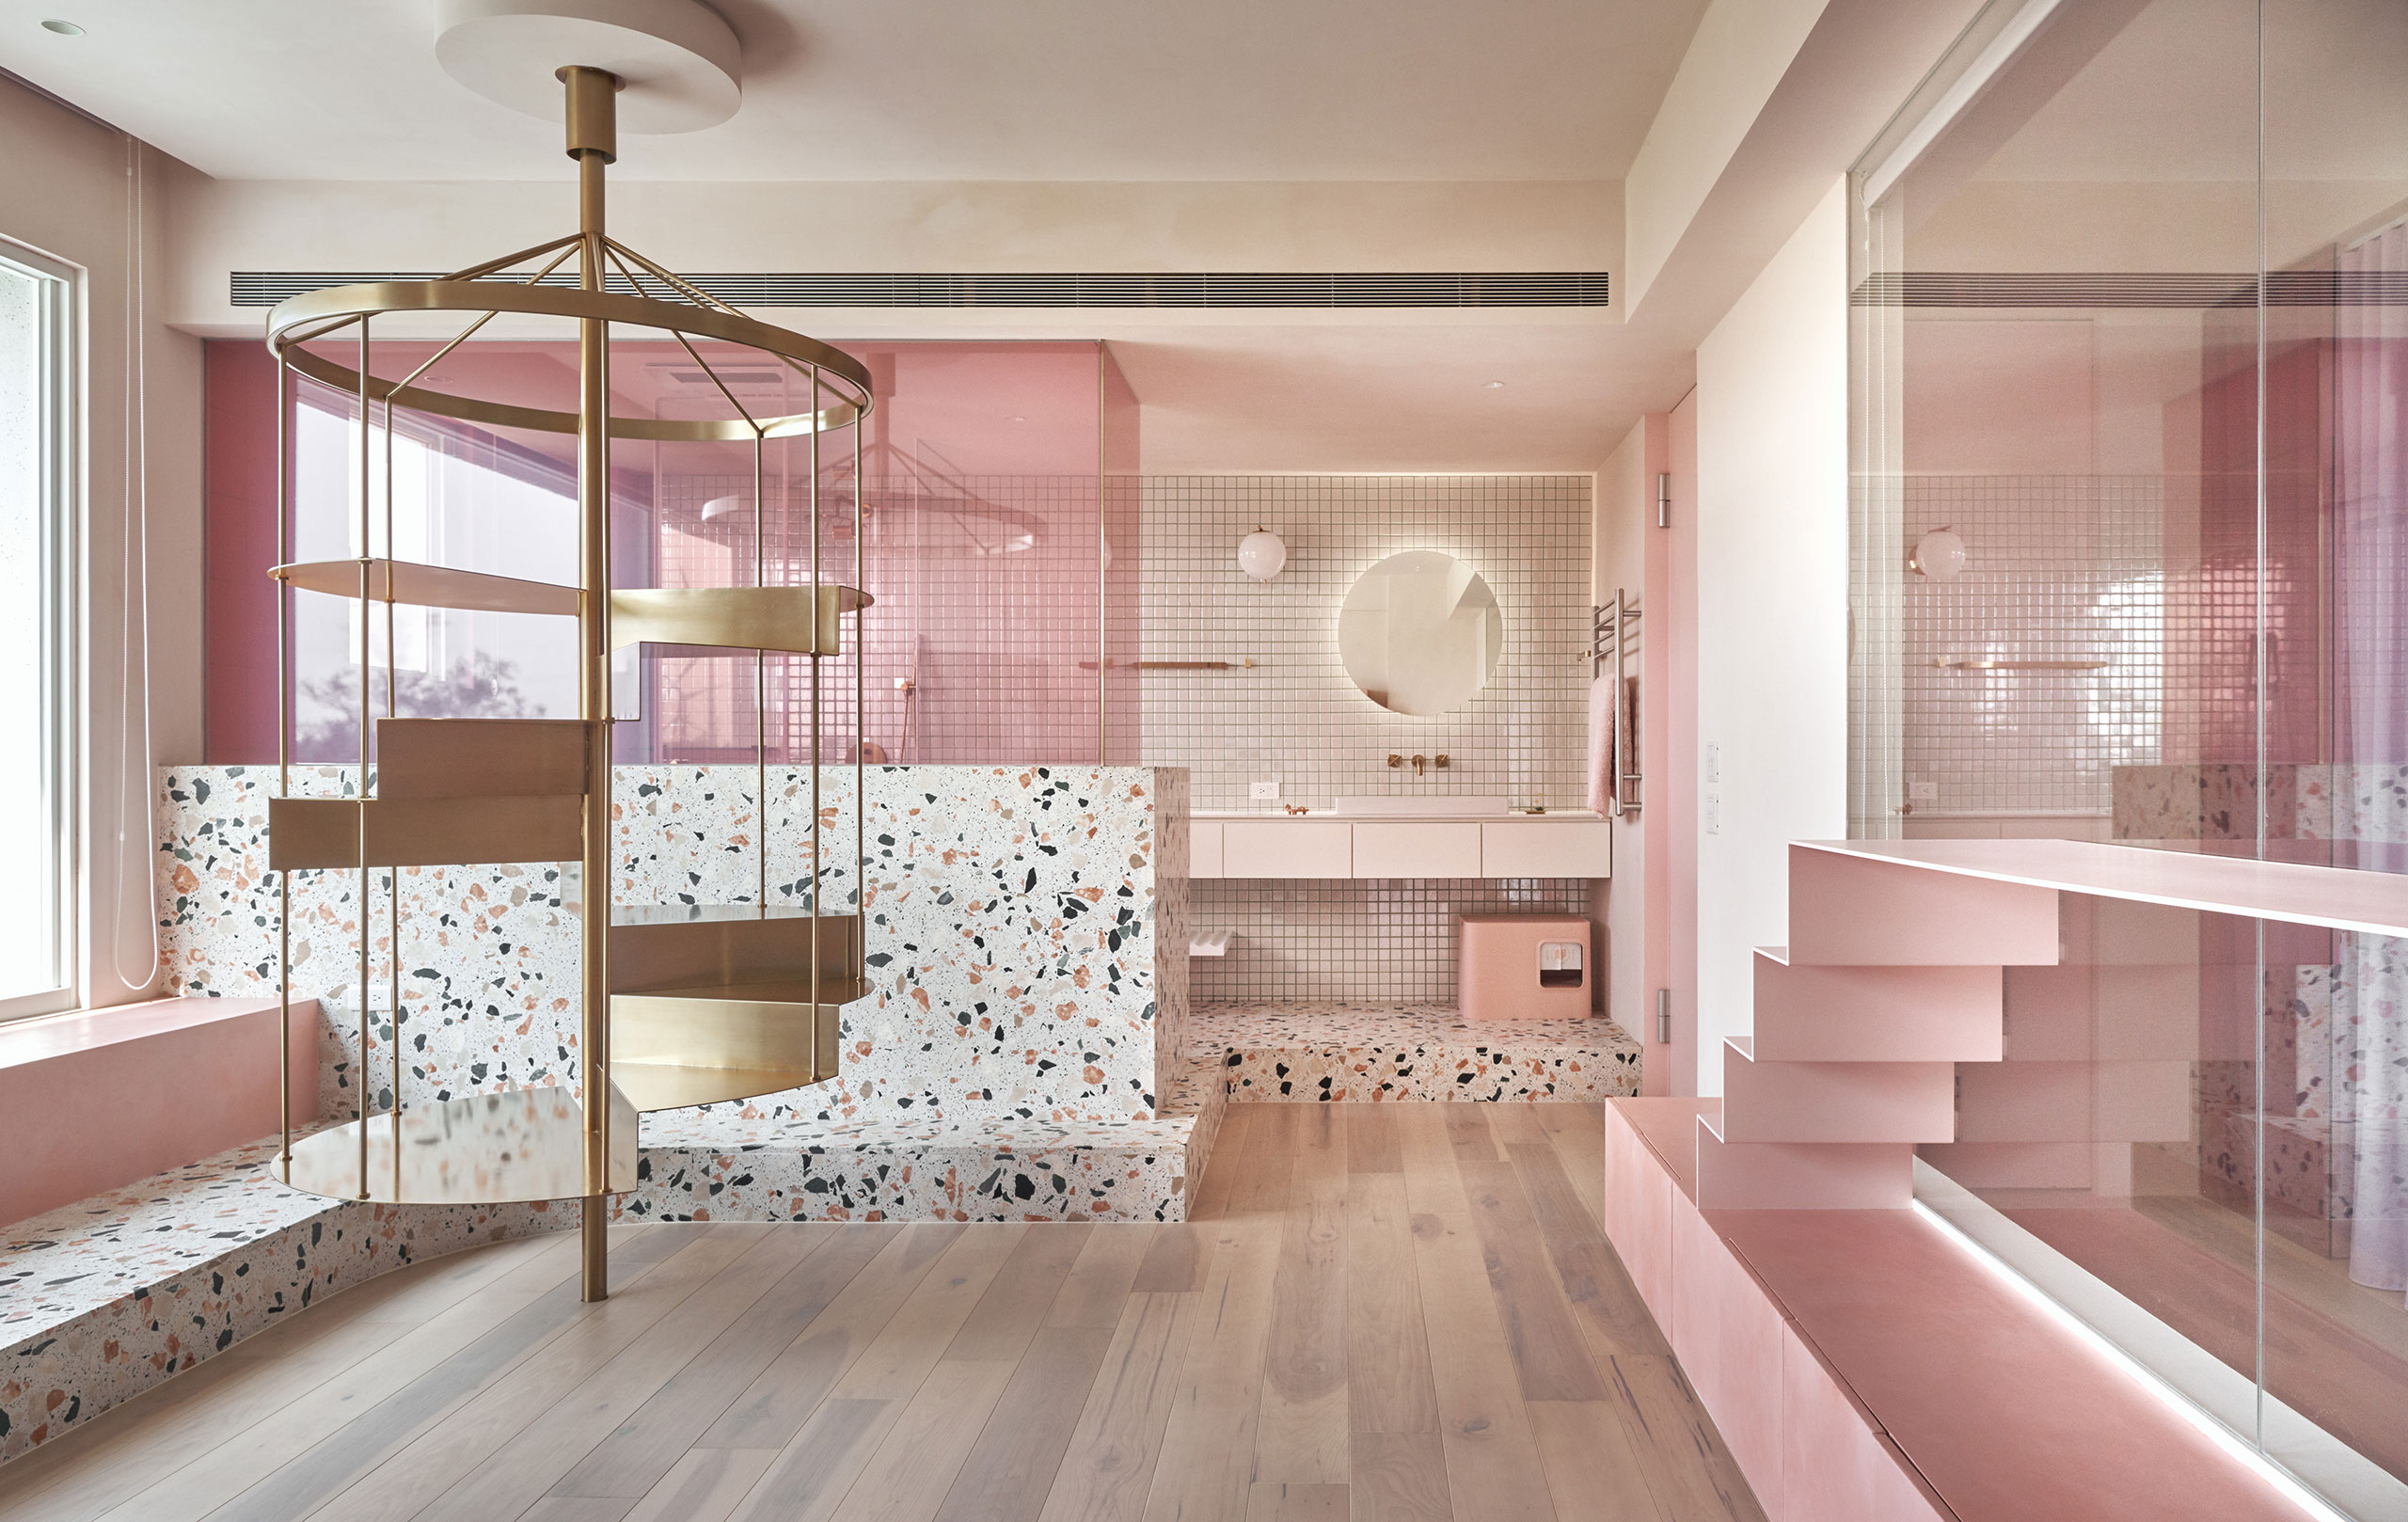 Cats’ Pink House by KC design studio.
Photography by Hey! Cheese.